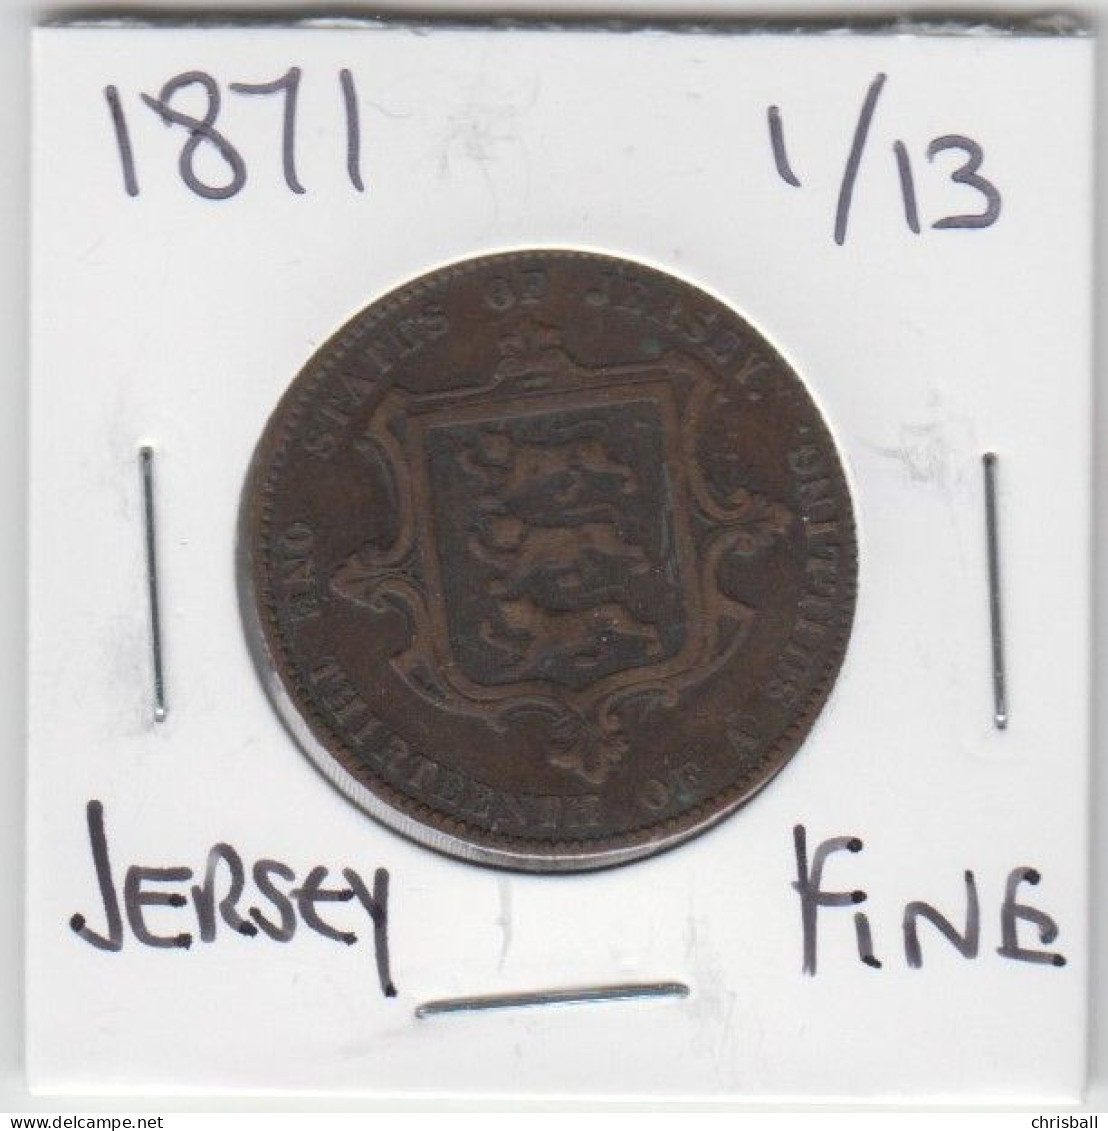 Jersey 1871 Coin Queen Victoria Thirteenth Of A Shilling 1/13 Condition Fine - Jersey